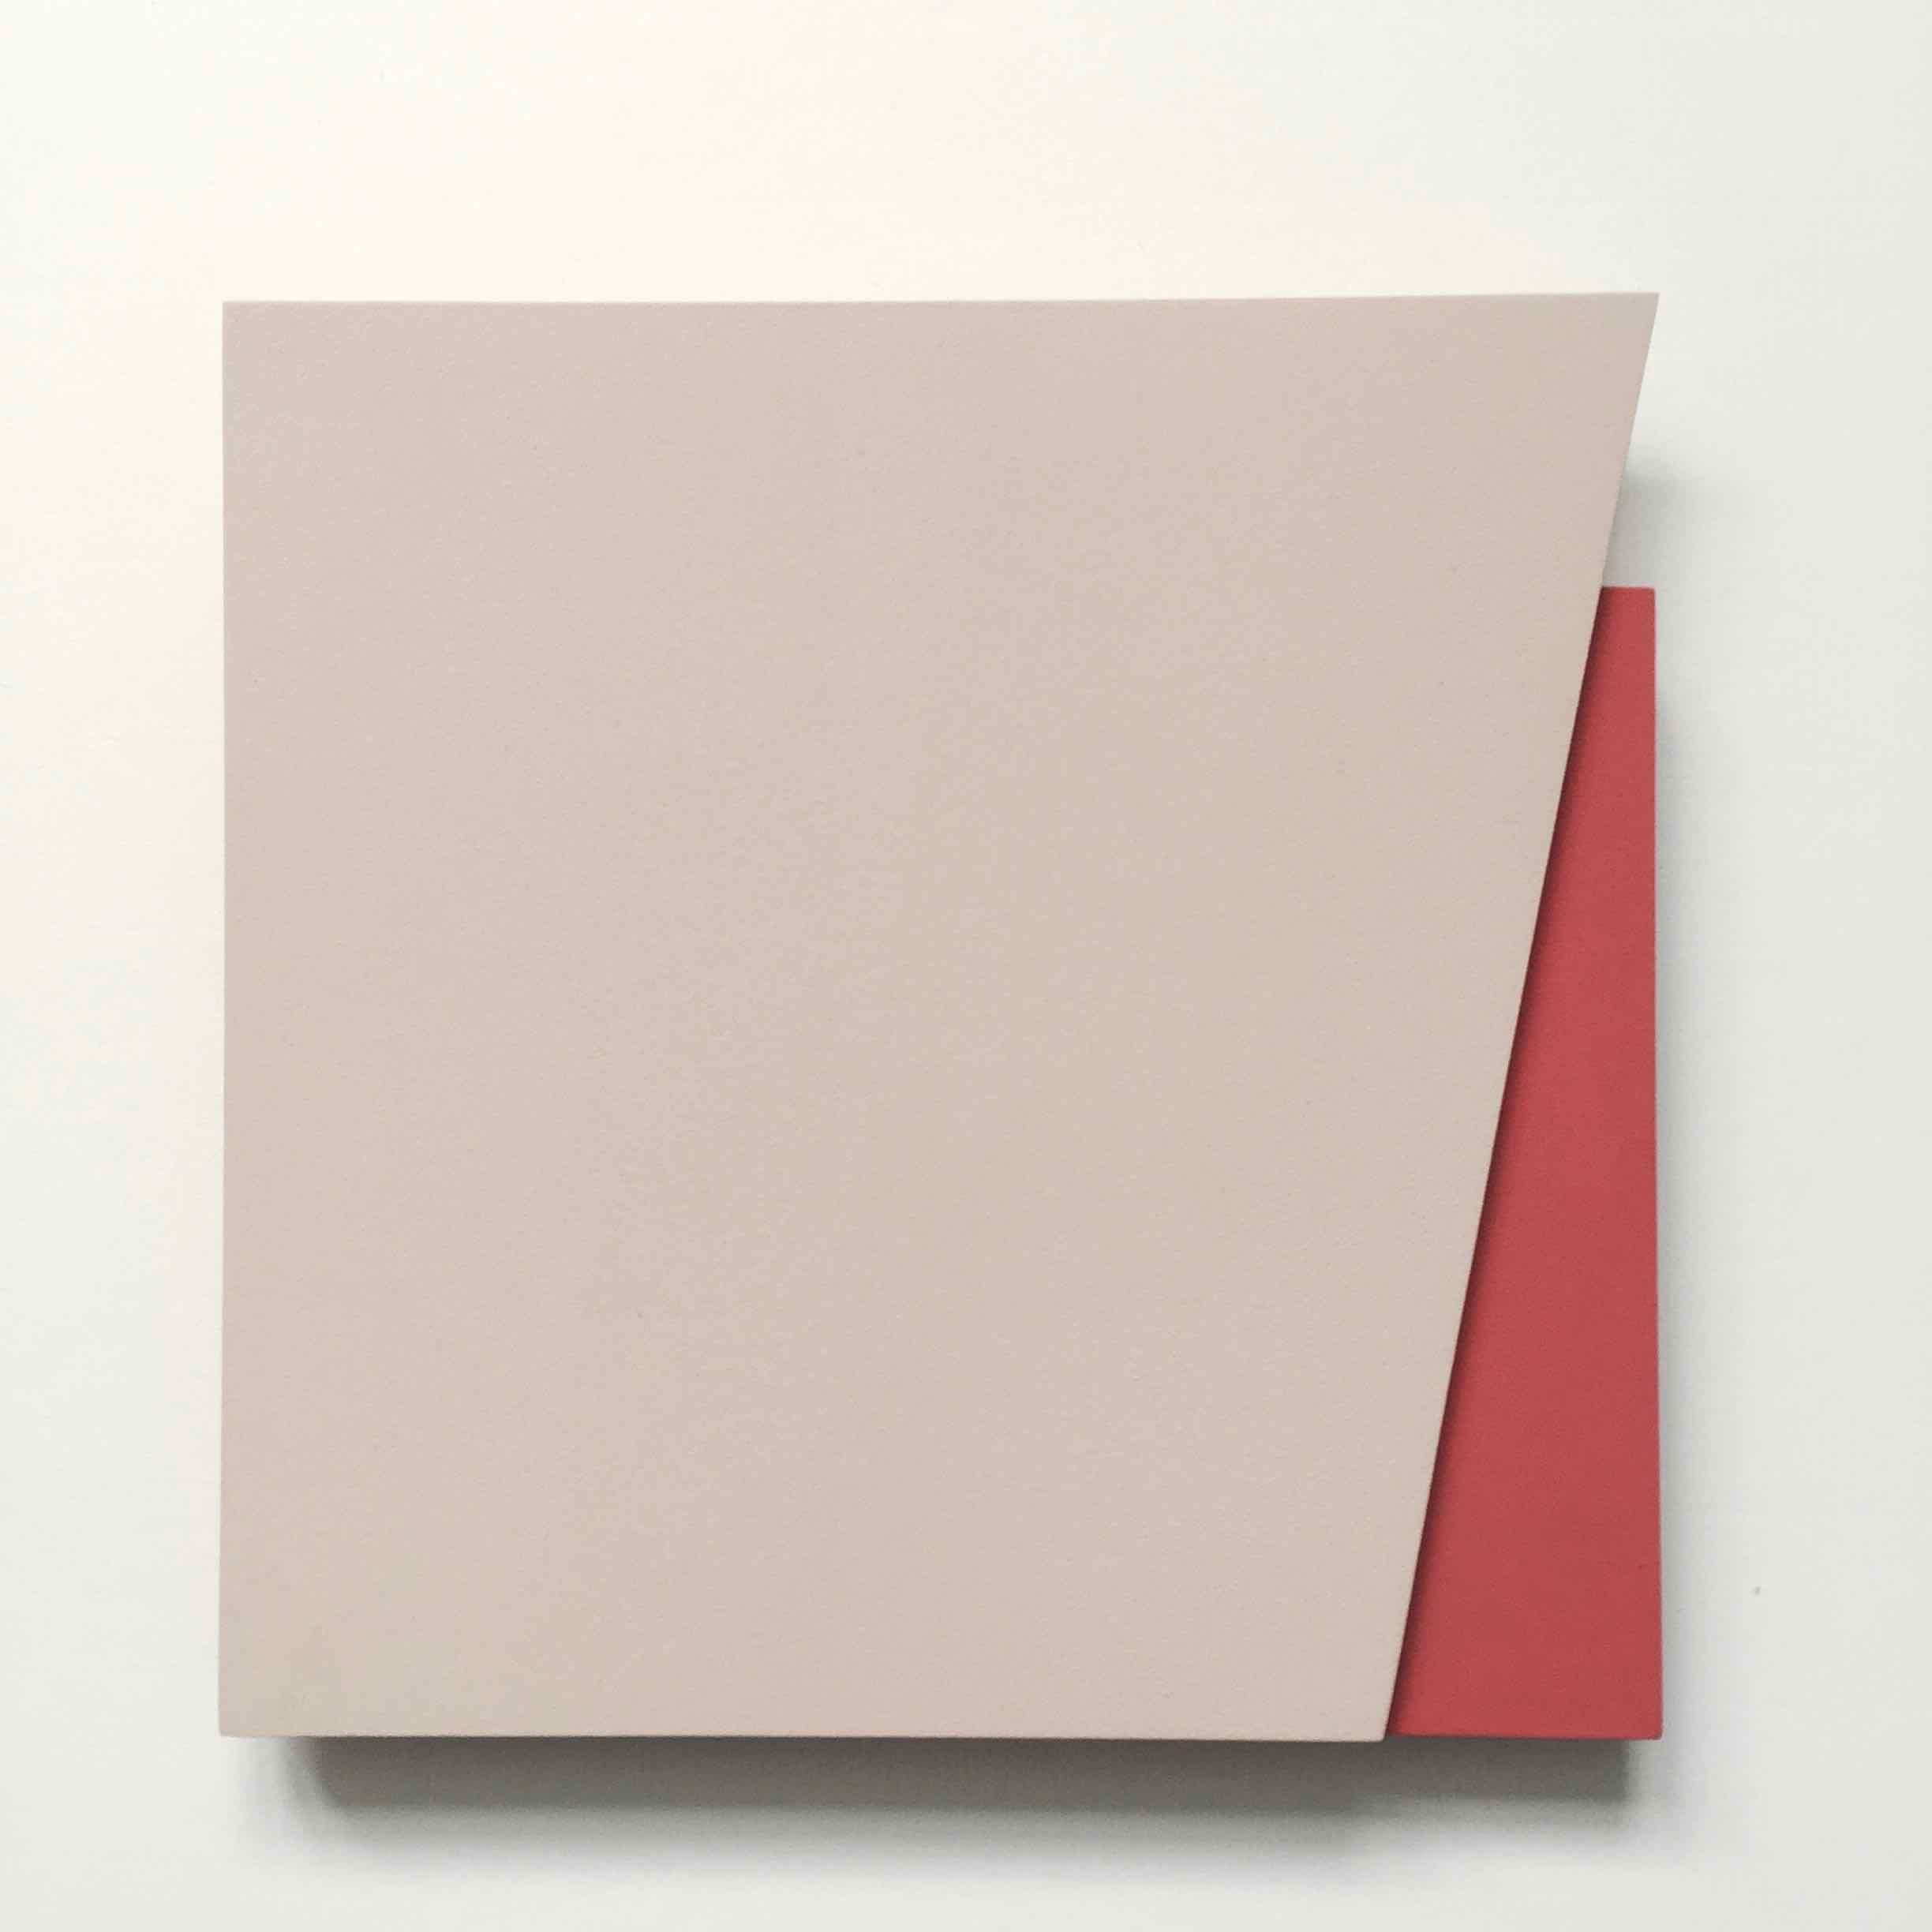 Laura Jane Scott Abstract Sculpture - 'Cut-out 20' (Number 001): Minimal Hard Edge Abstract Painting by Laura Scott